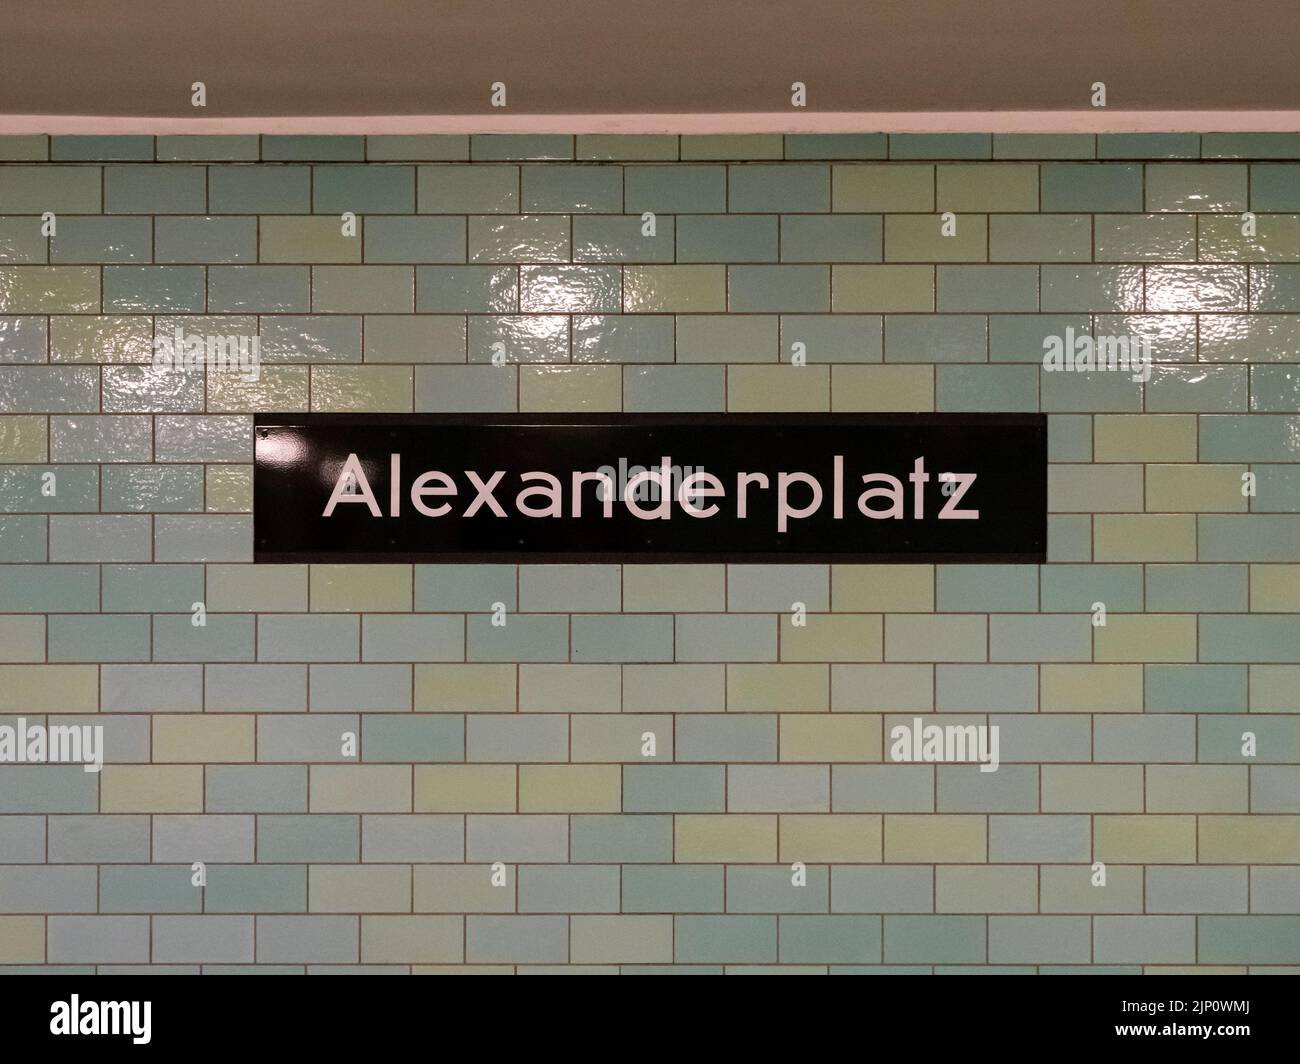 Alexanderplatz U-Bahn station in Berlin city. Name board with white letters on a black metal plate. The wall exterior is tiled in green color. Stock Photo